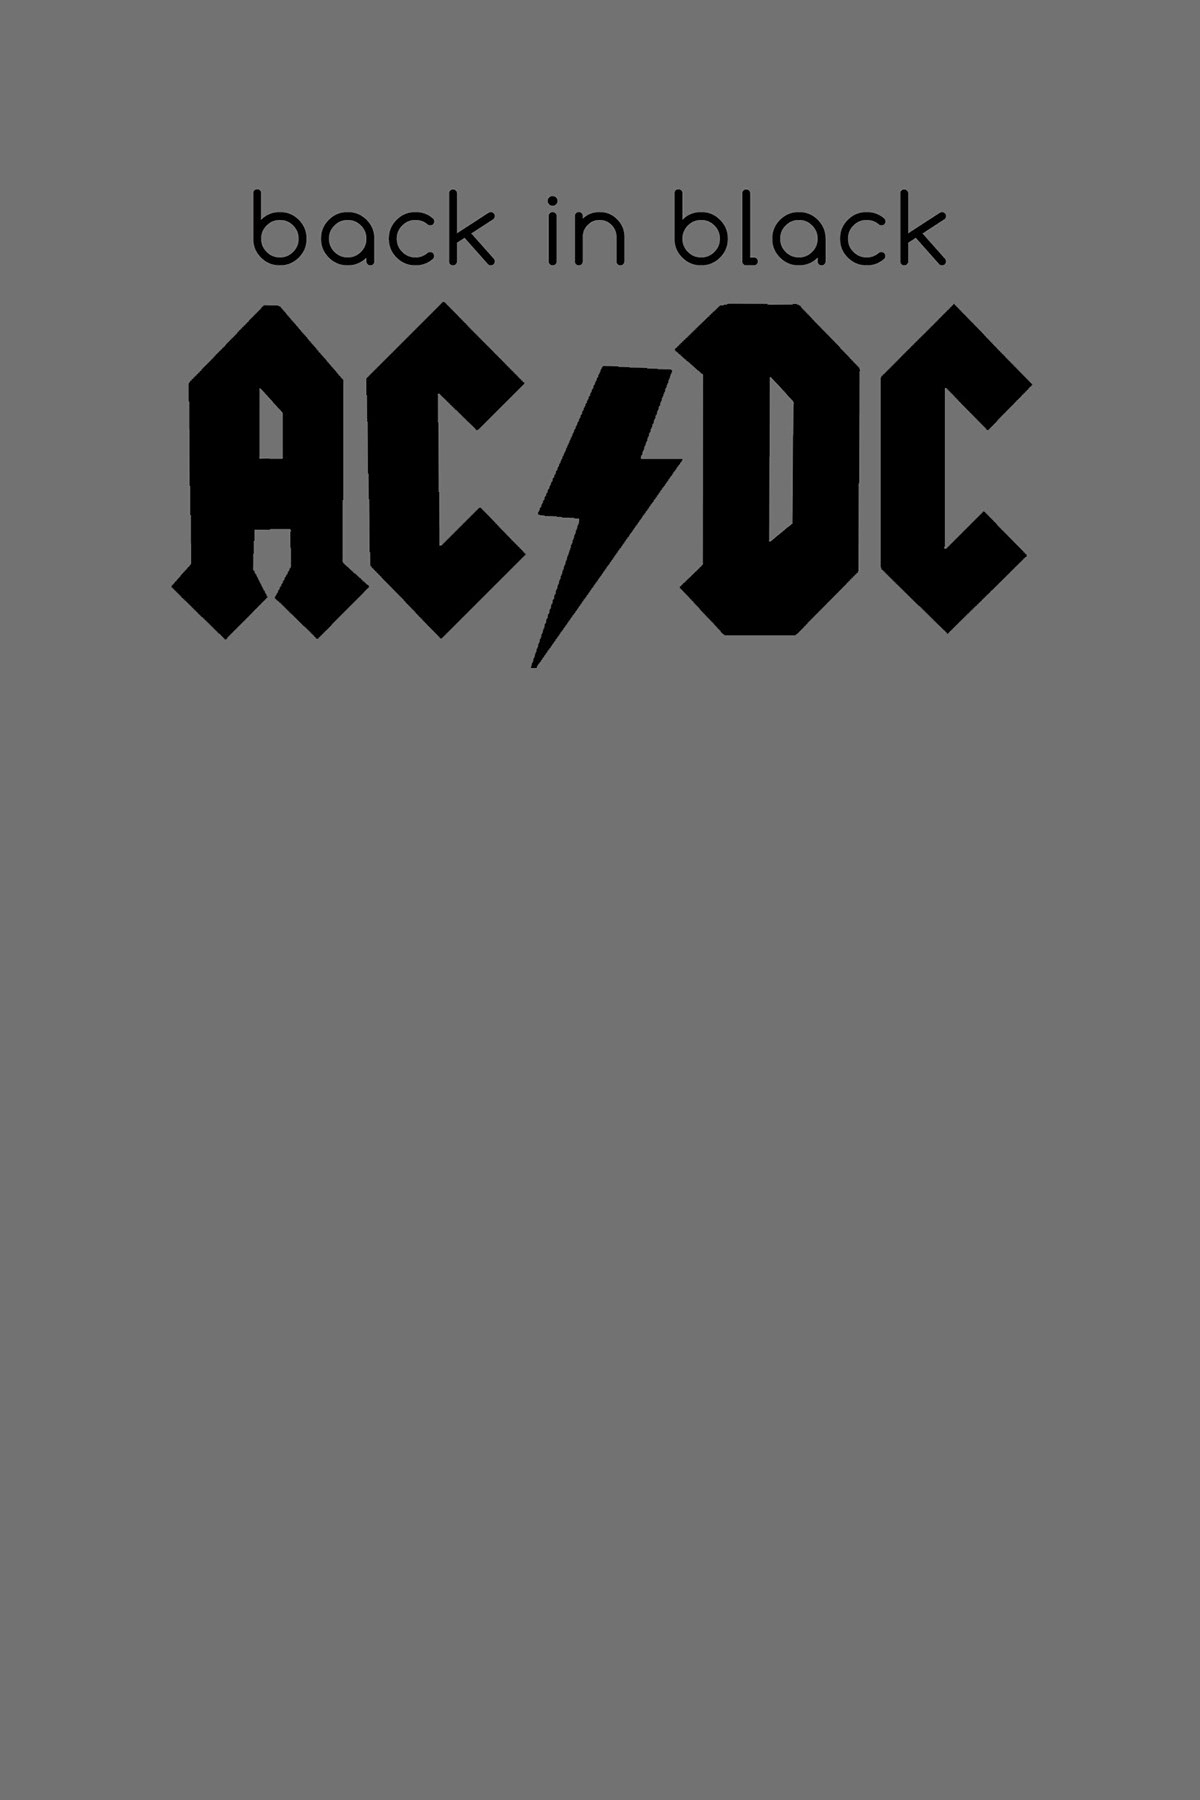 AC DC foo fighters the white stripes red hot chili peppers Metallica black sabbath Aerosmith Derek And The dominos layla Back In Black poster posters rock